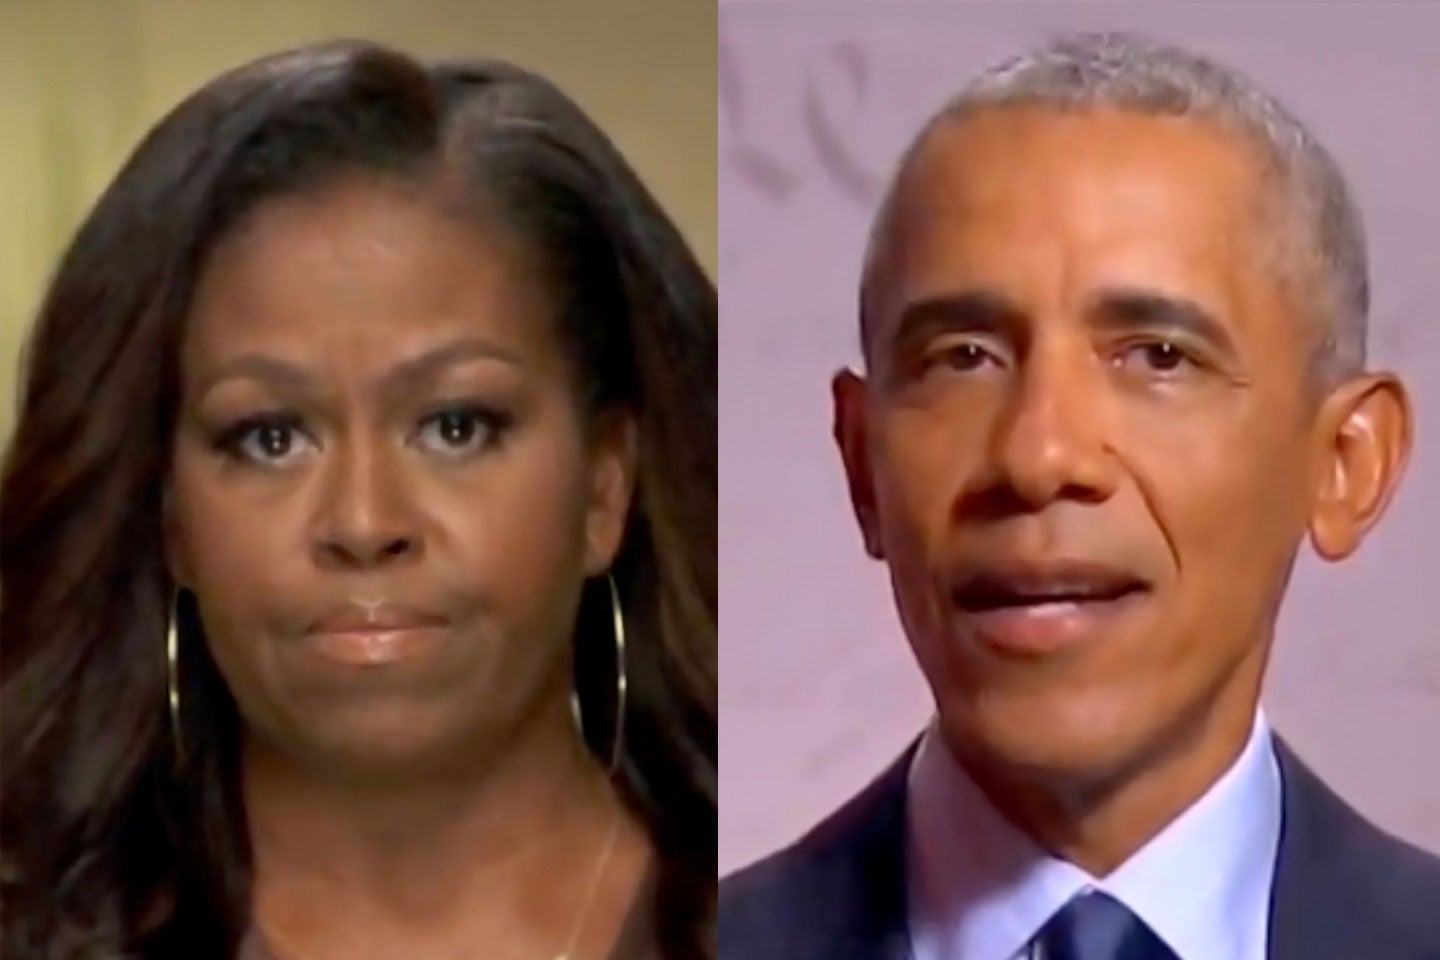 Screenshots of Michelle and Barack Obama speaking this week.